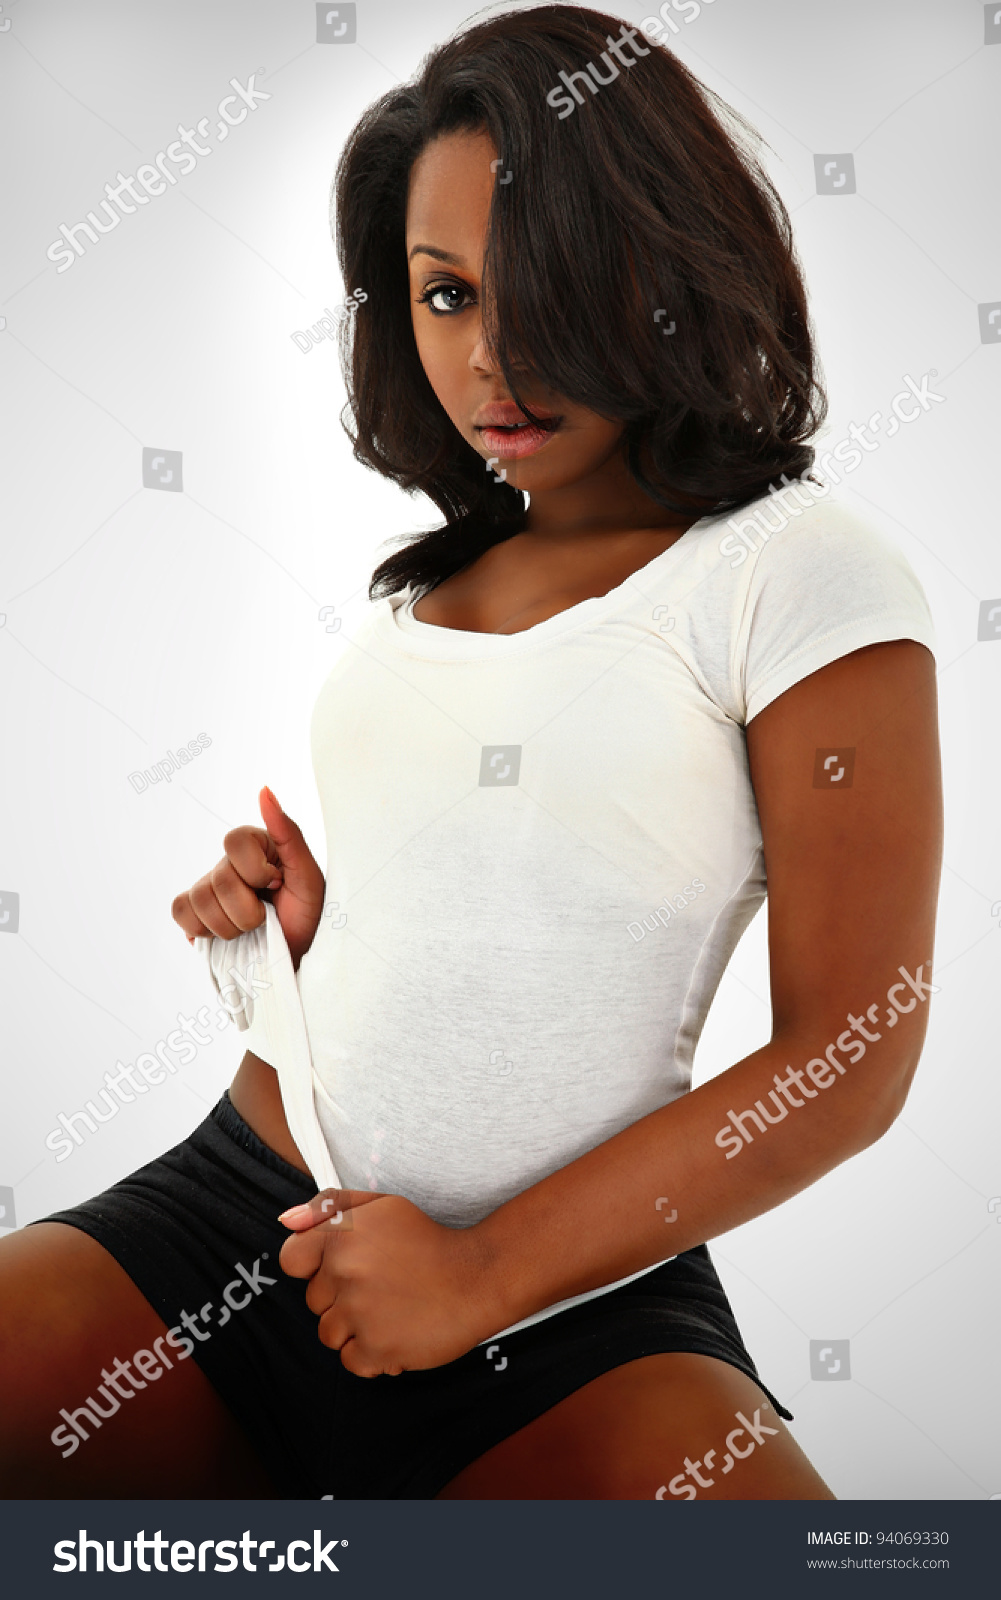 Hot Black Girl Picture